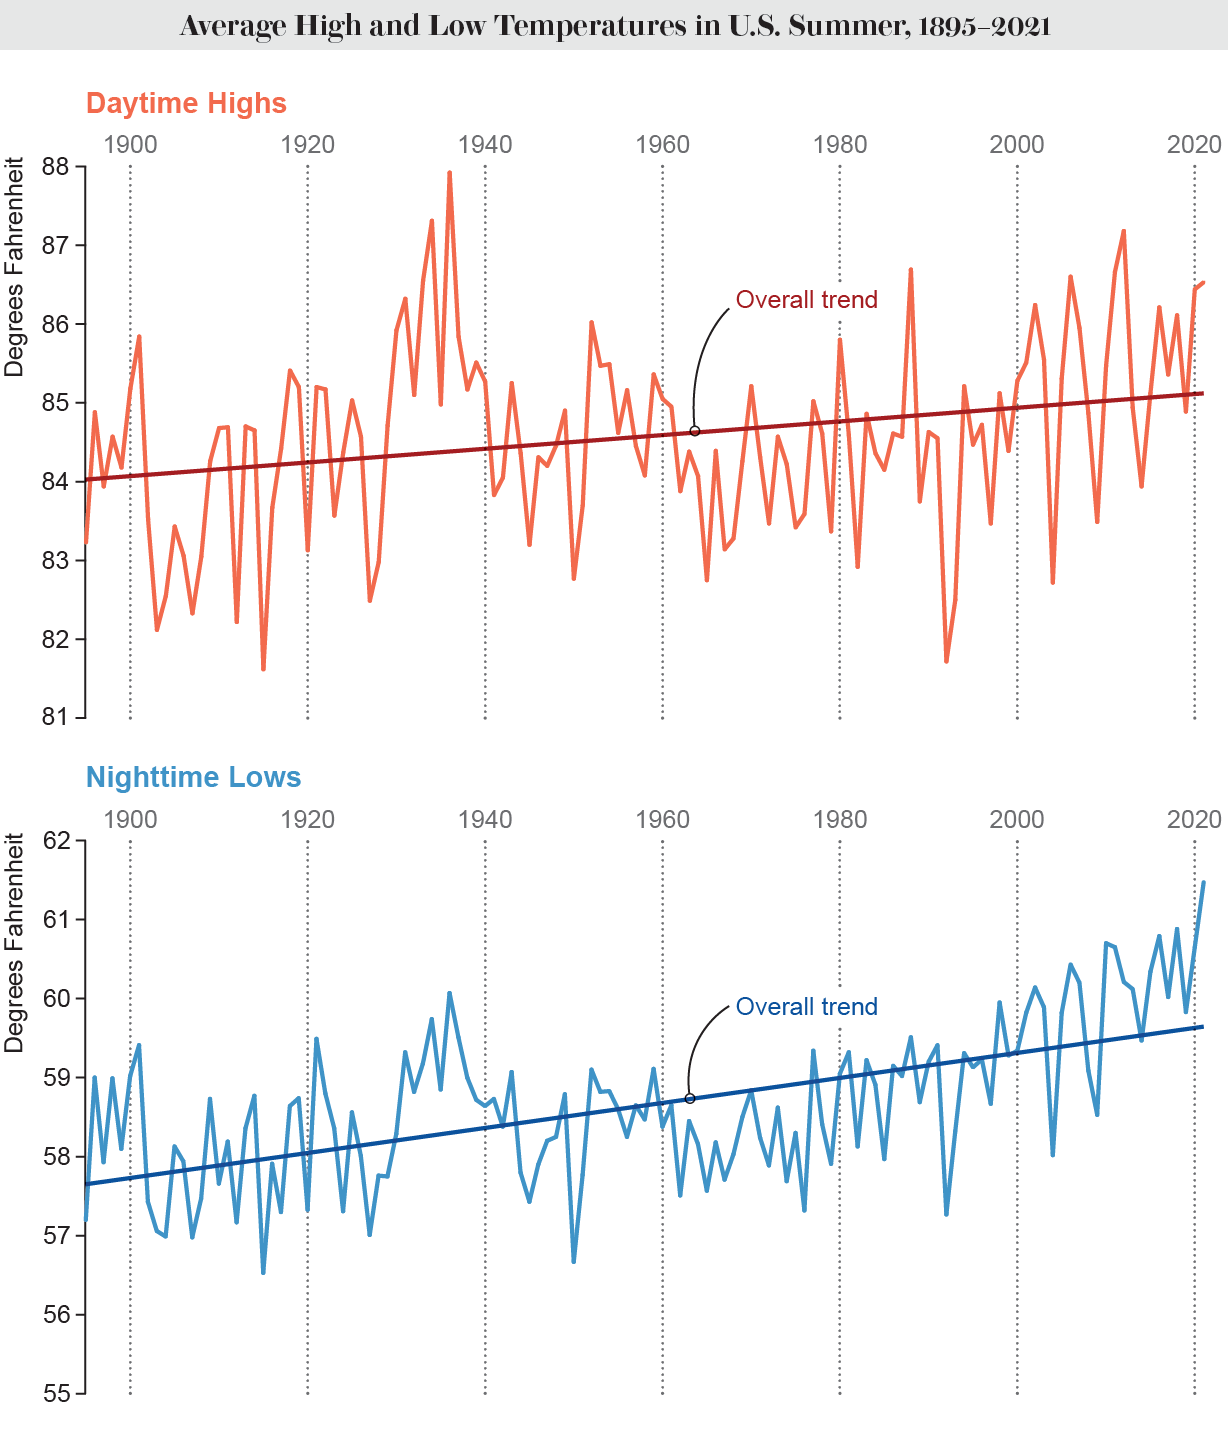 The line graphs show the average high and low temperatures in the US summer from 1895 to 2021, with overall trends showing increases.